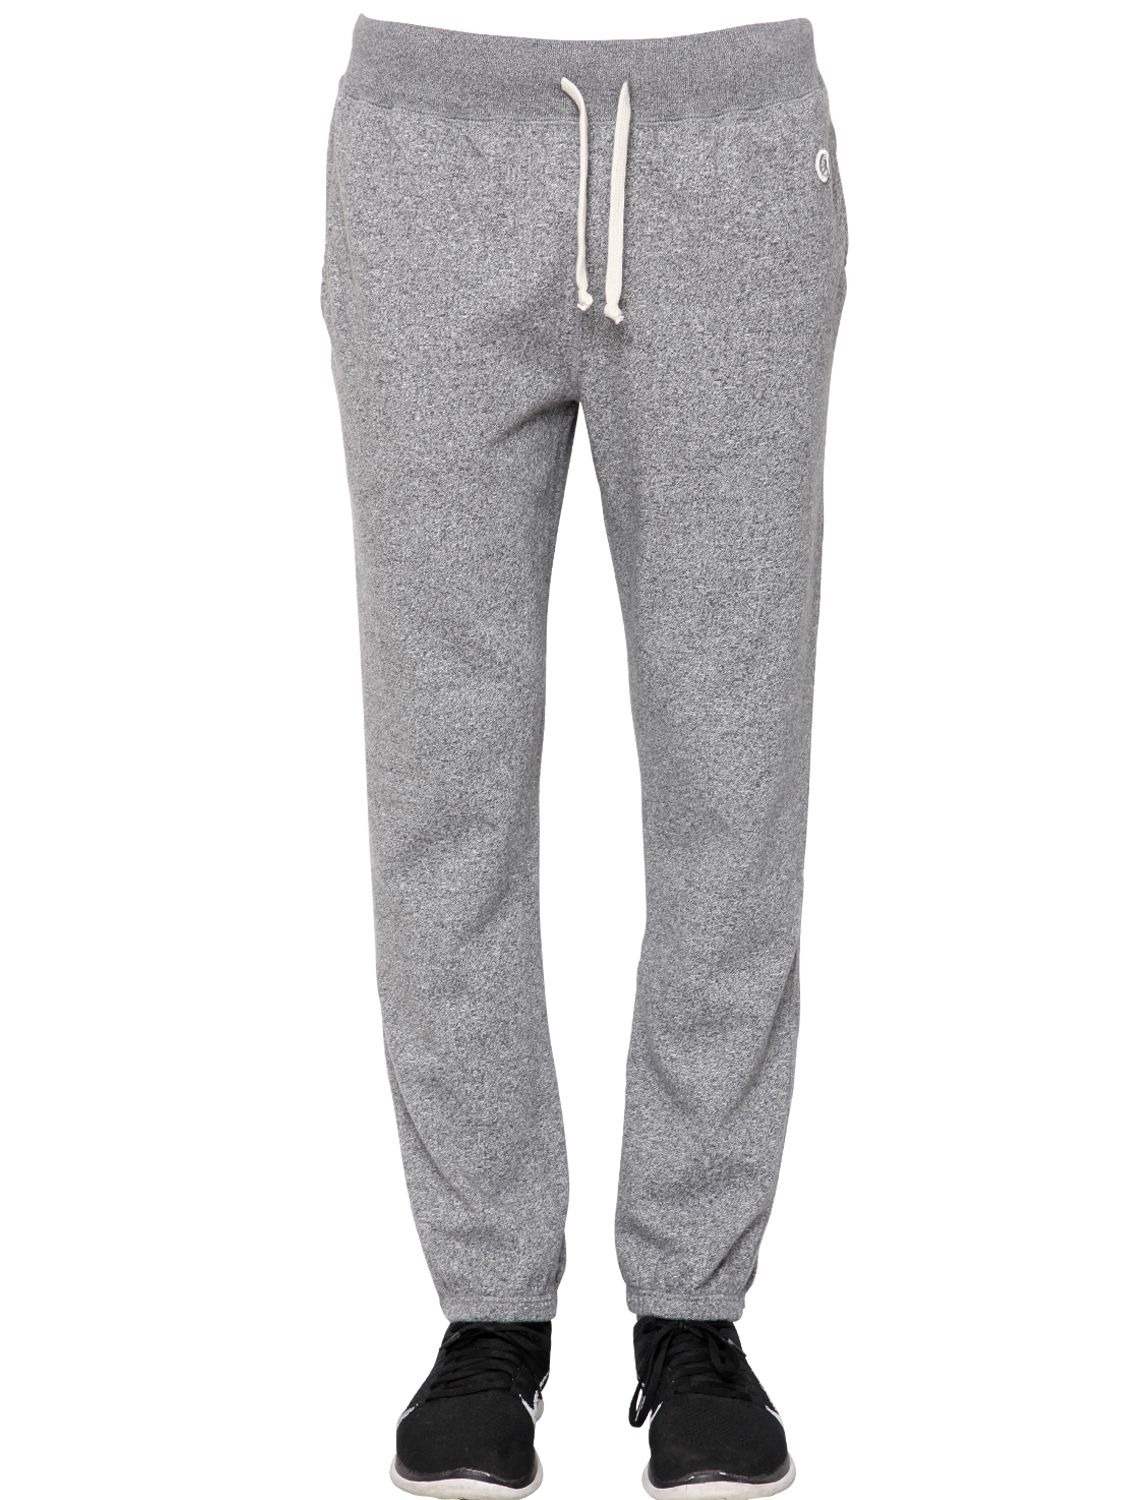 Todd snyder x champion Cotton Jersey Jogging Pants in Gray for Men ...